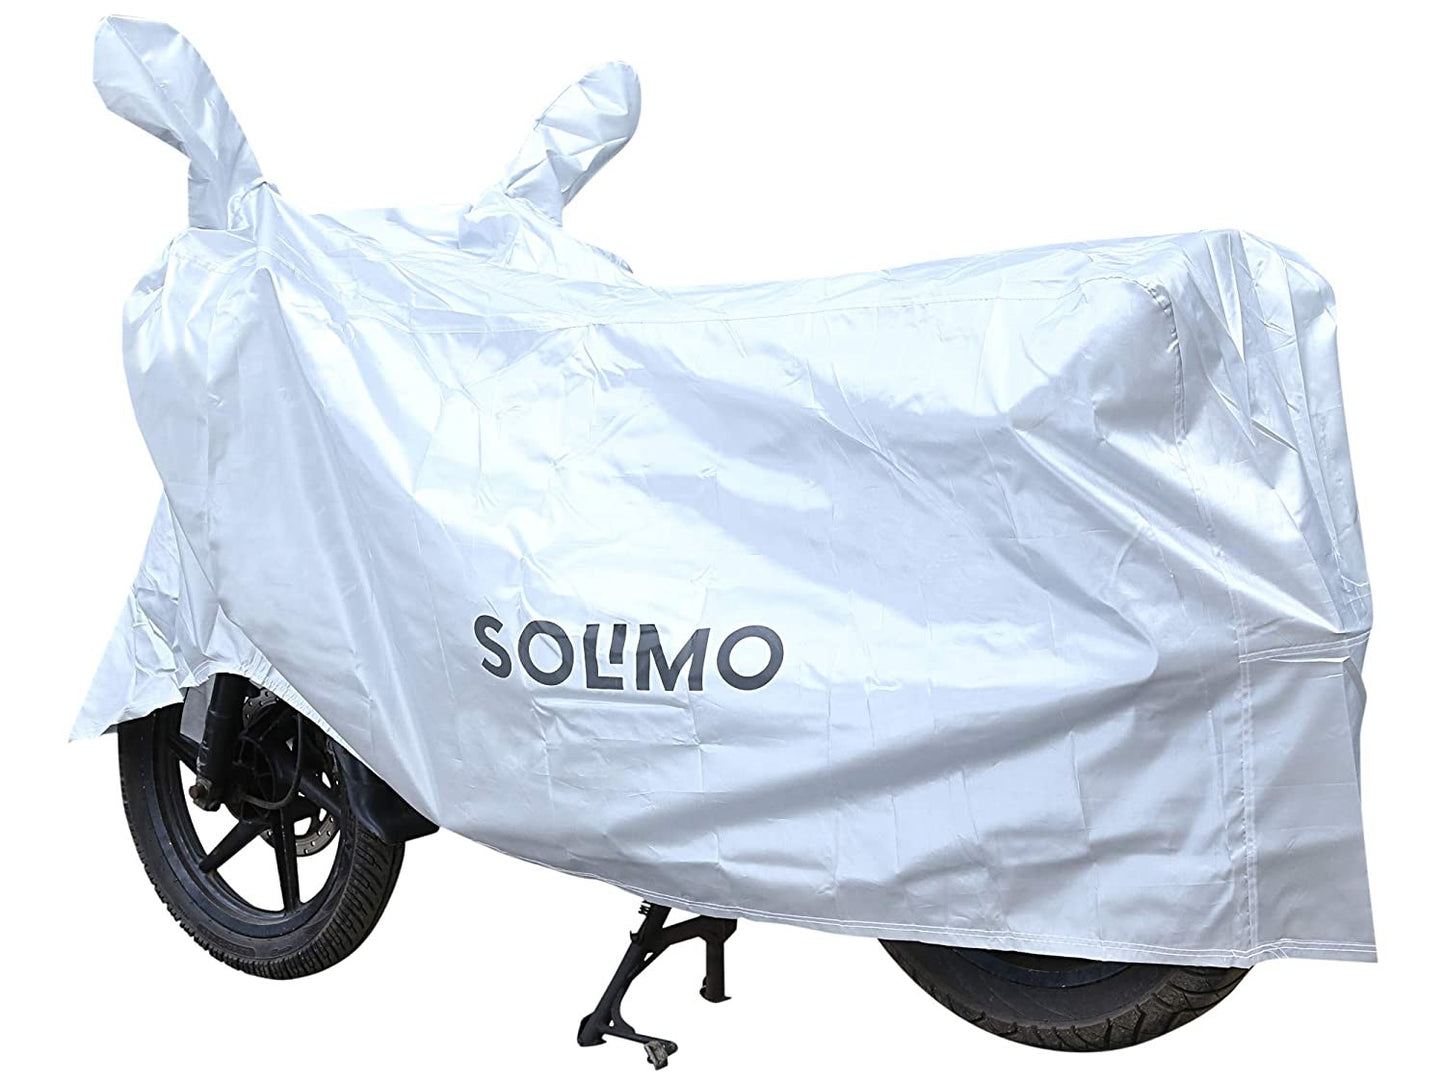 VP1 Solimo UV Protection & Dustproof Bike Cover (Silver)